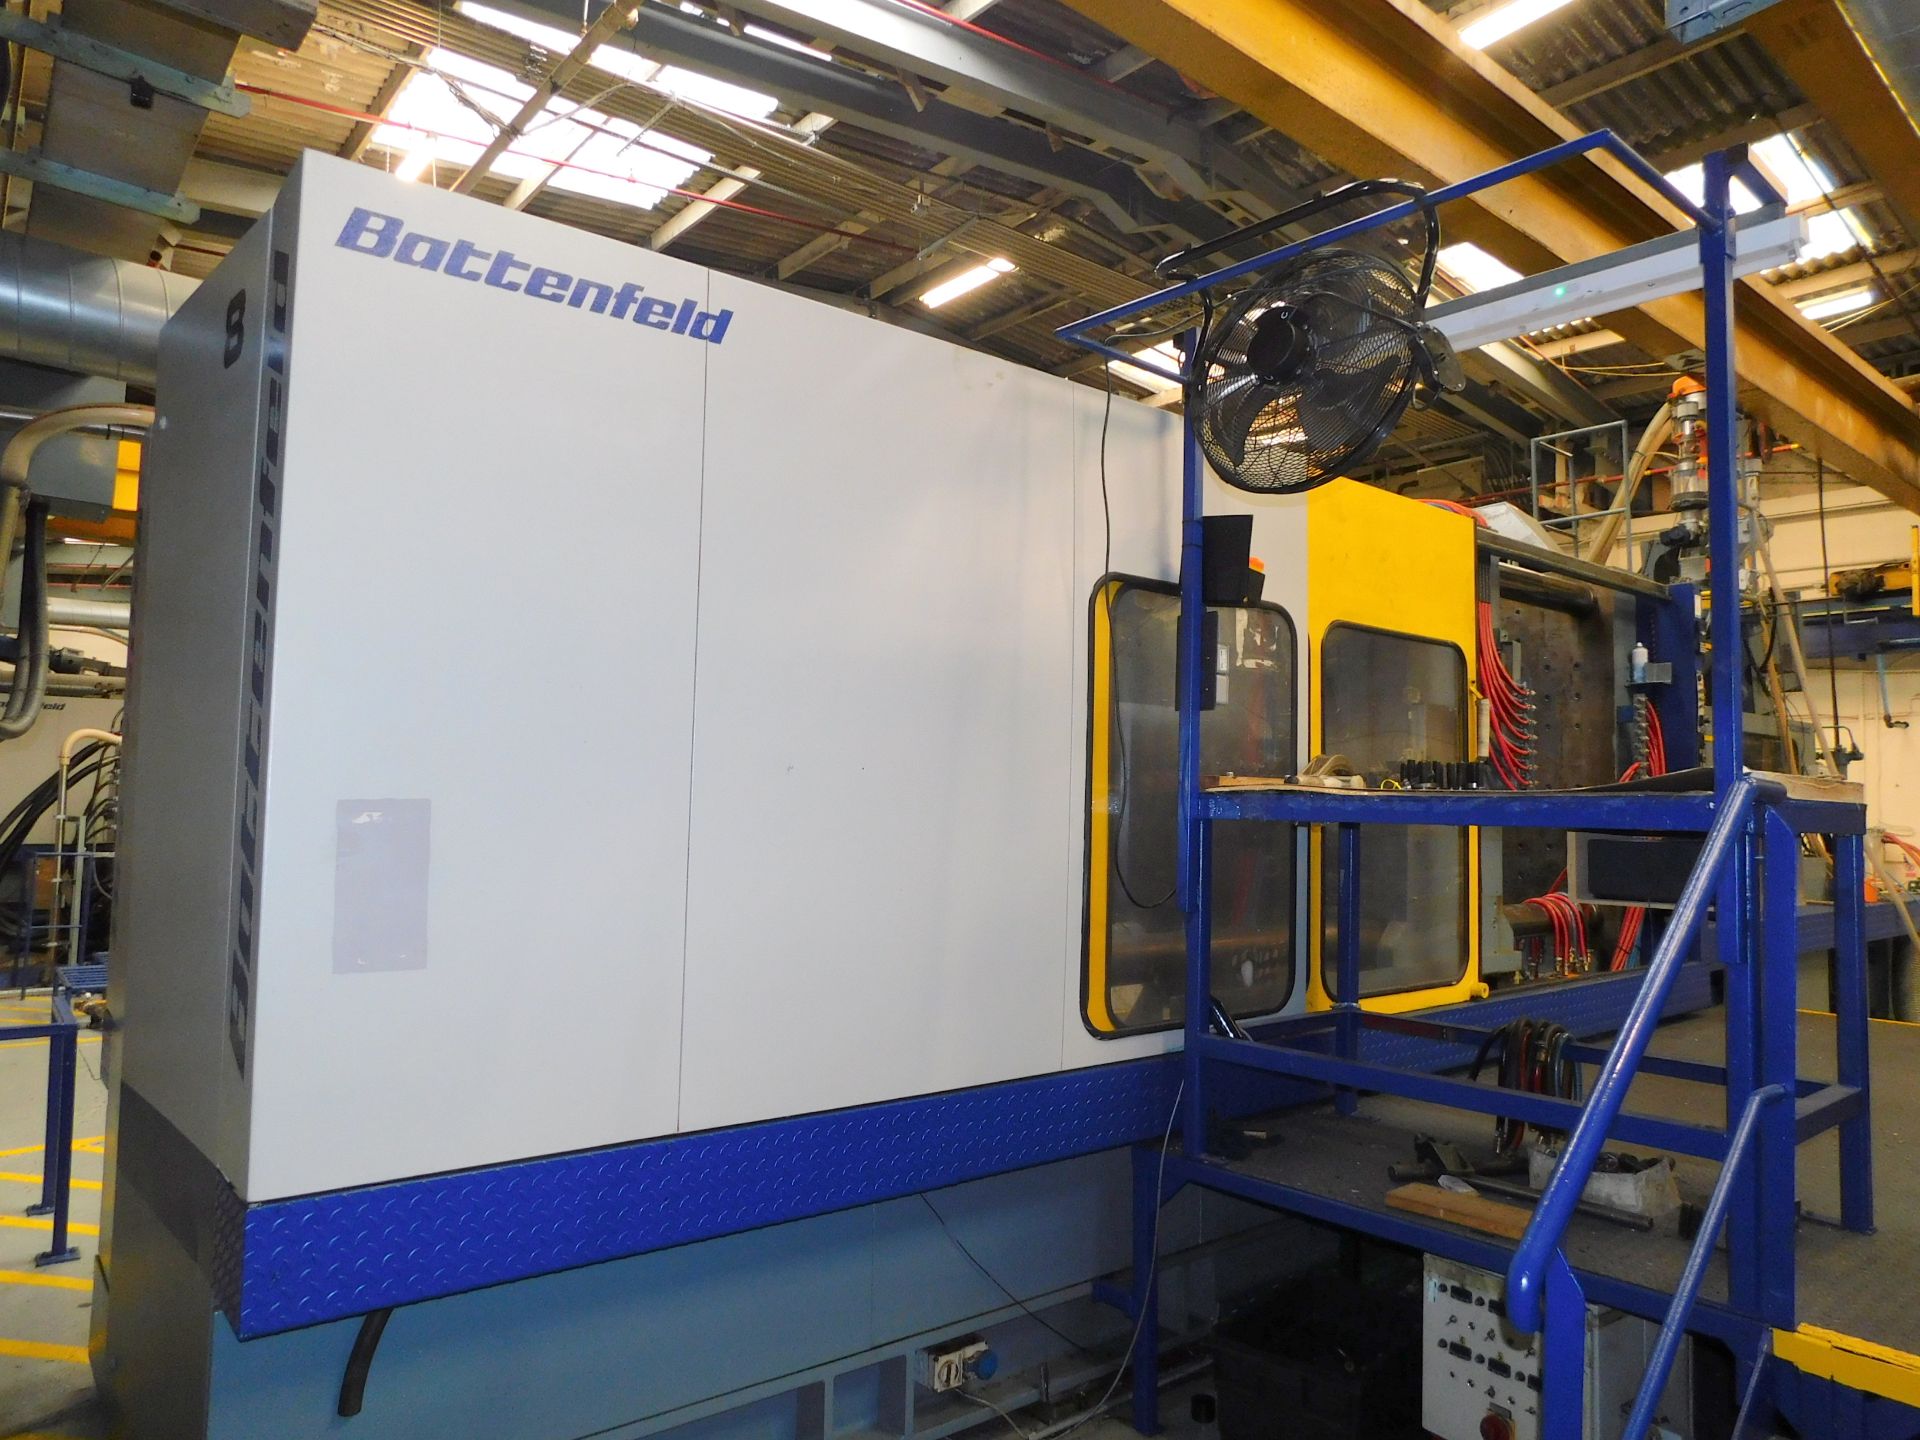 1989 Battenfeld BN-T105000-5000/128000, Injection Moulding Machine, Serial Number: 45783.S.11.89,